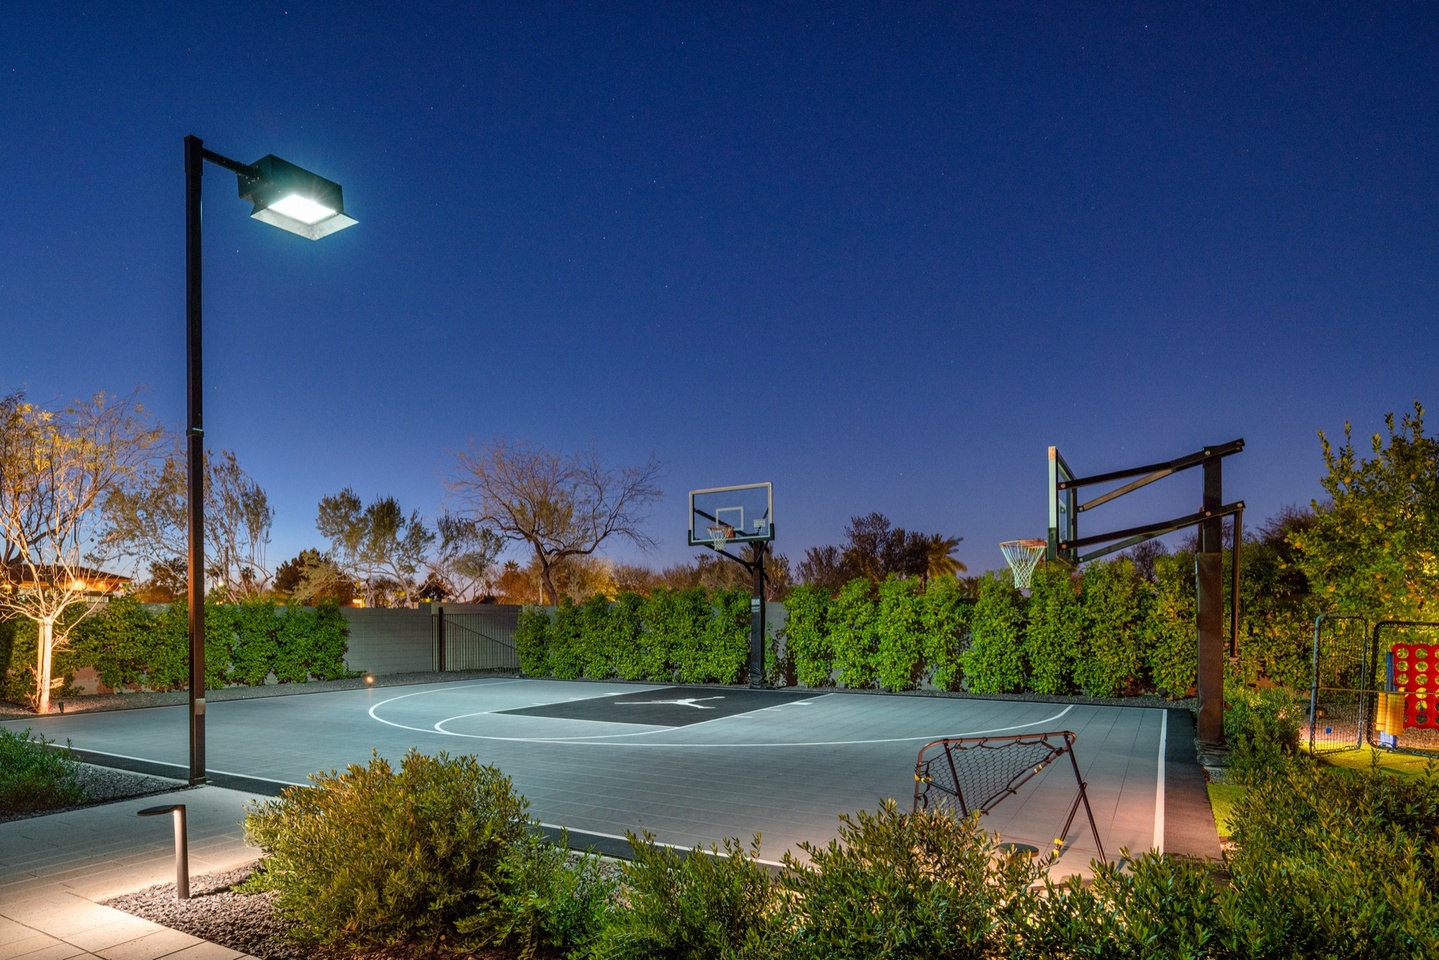 Sports court with two basketball hoops